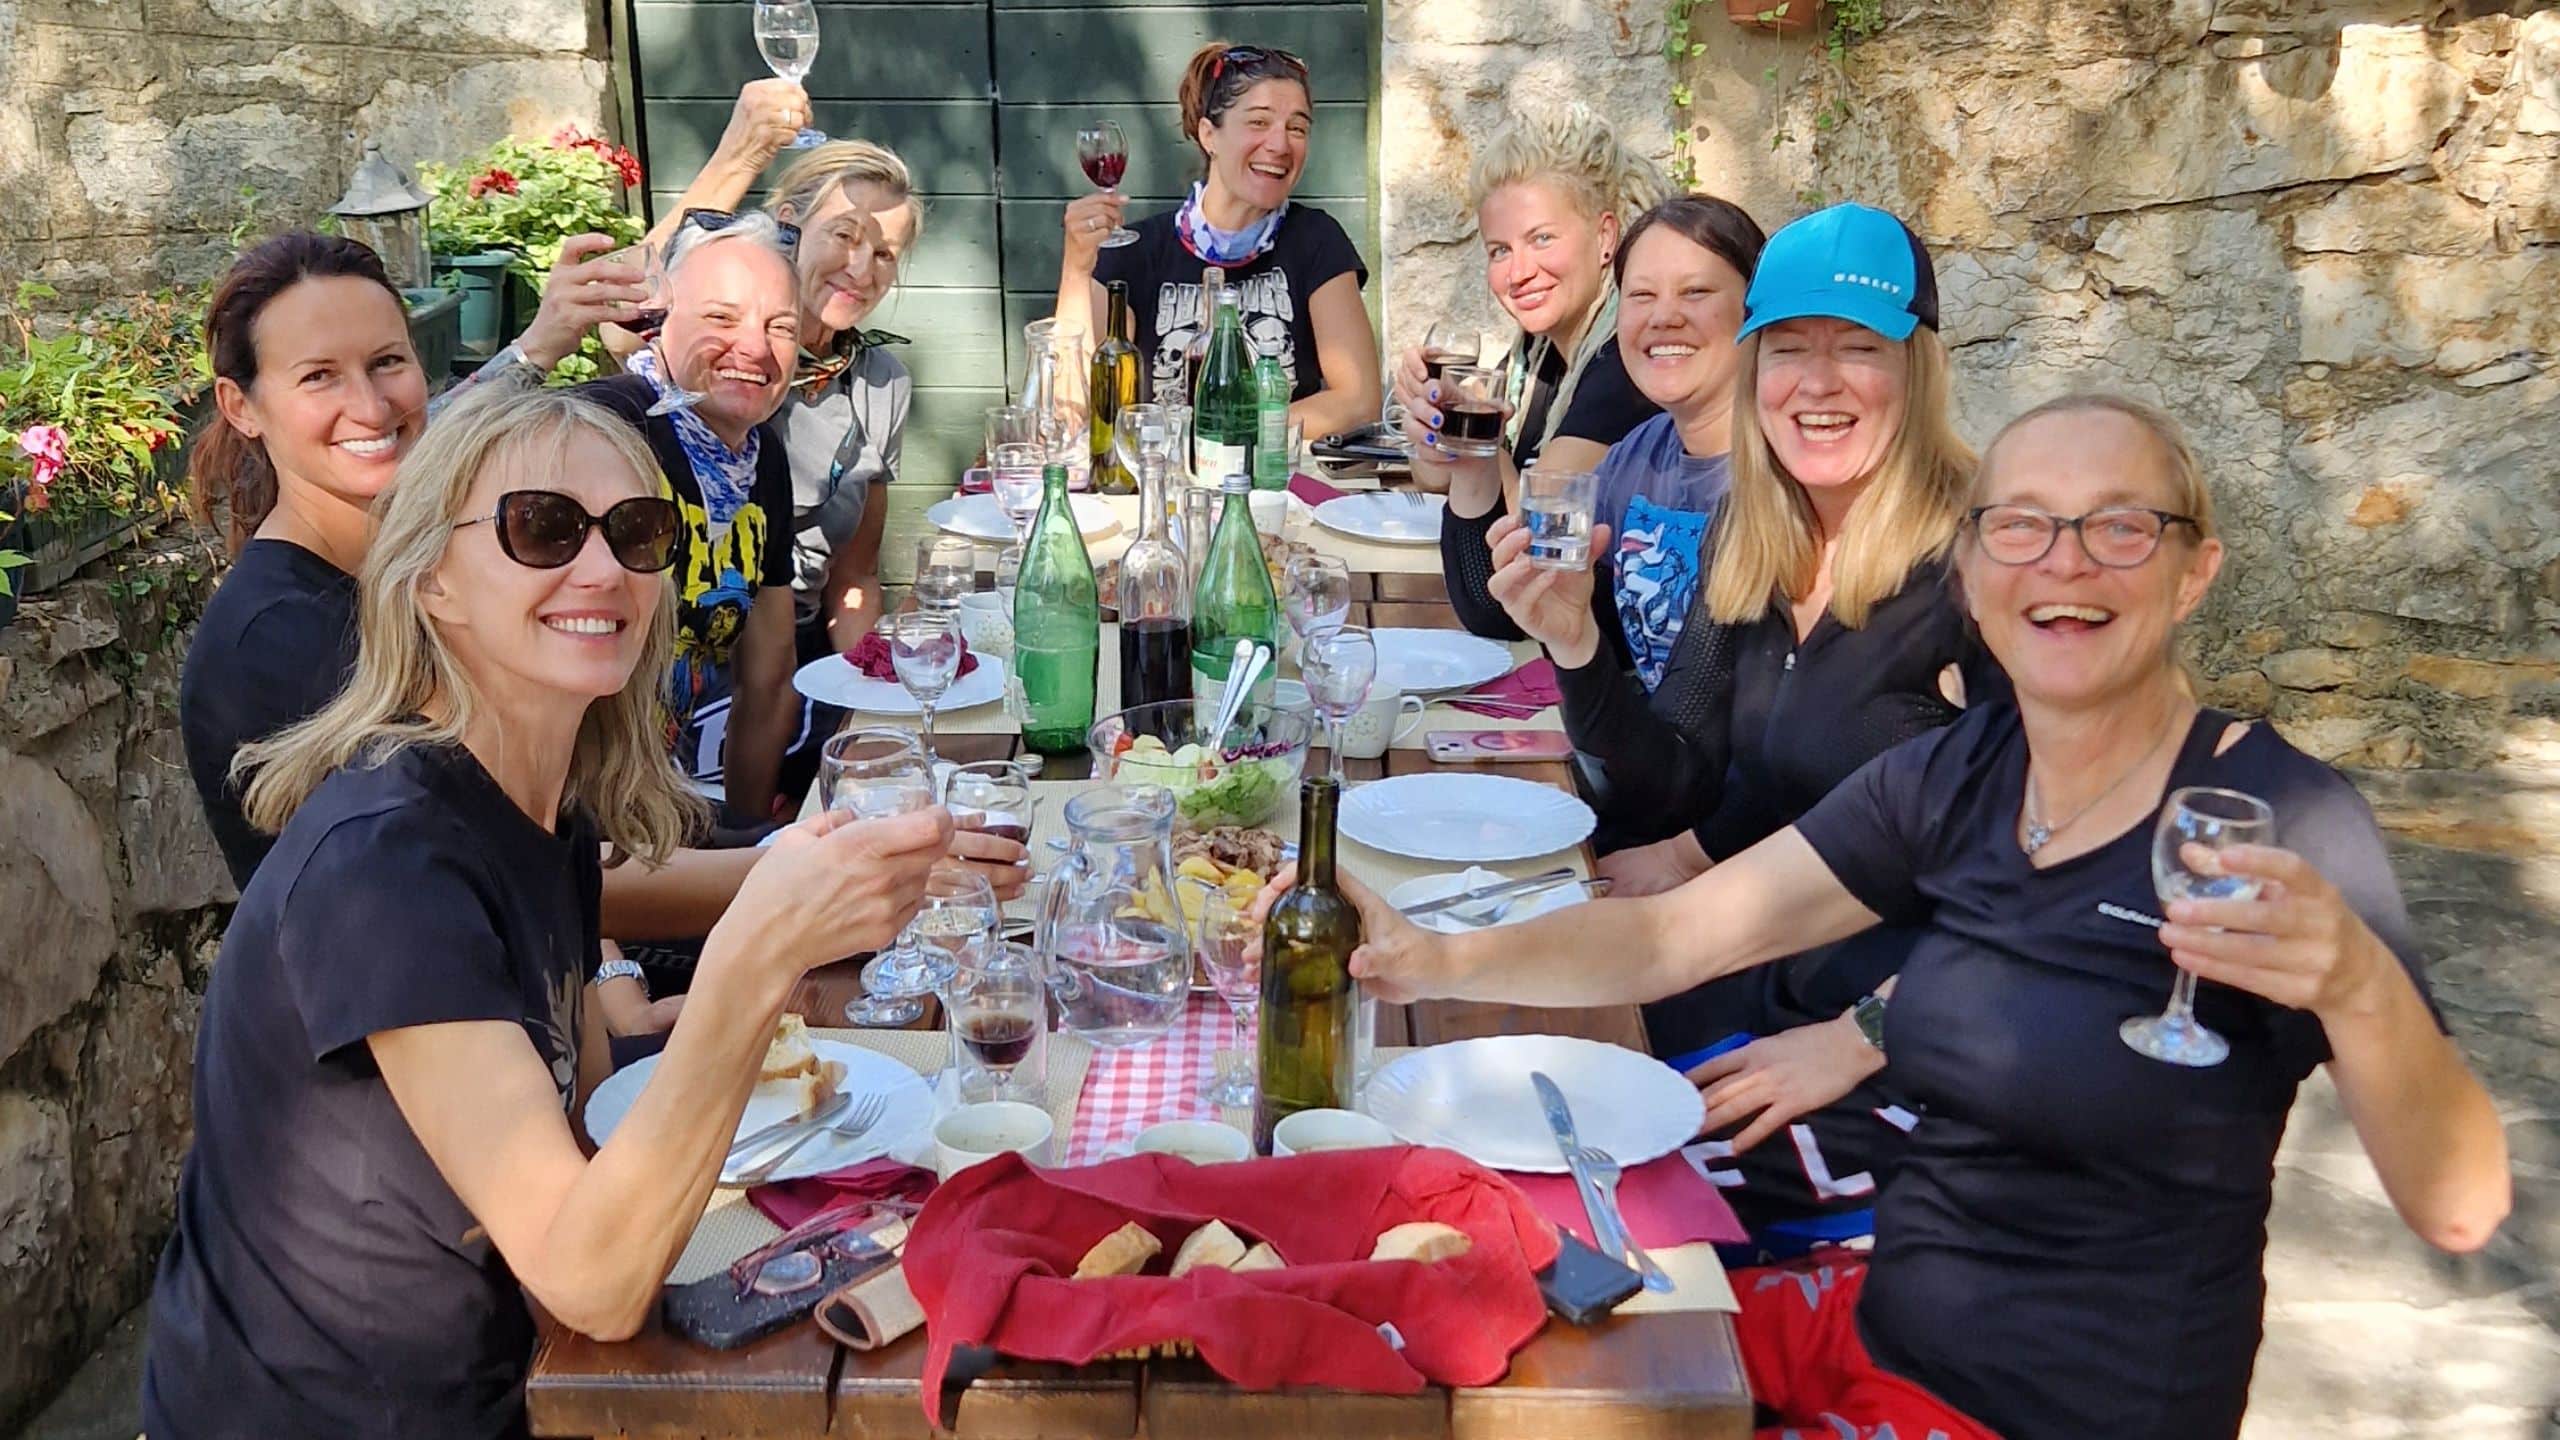 Funmoto ADVentures sightseeing 4 day only womens motorcycle tour in Croatia at lunch